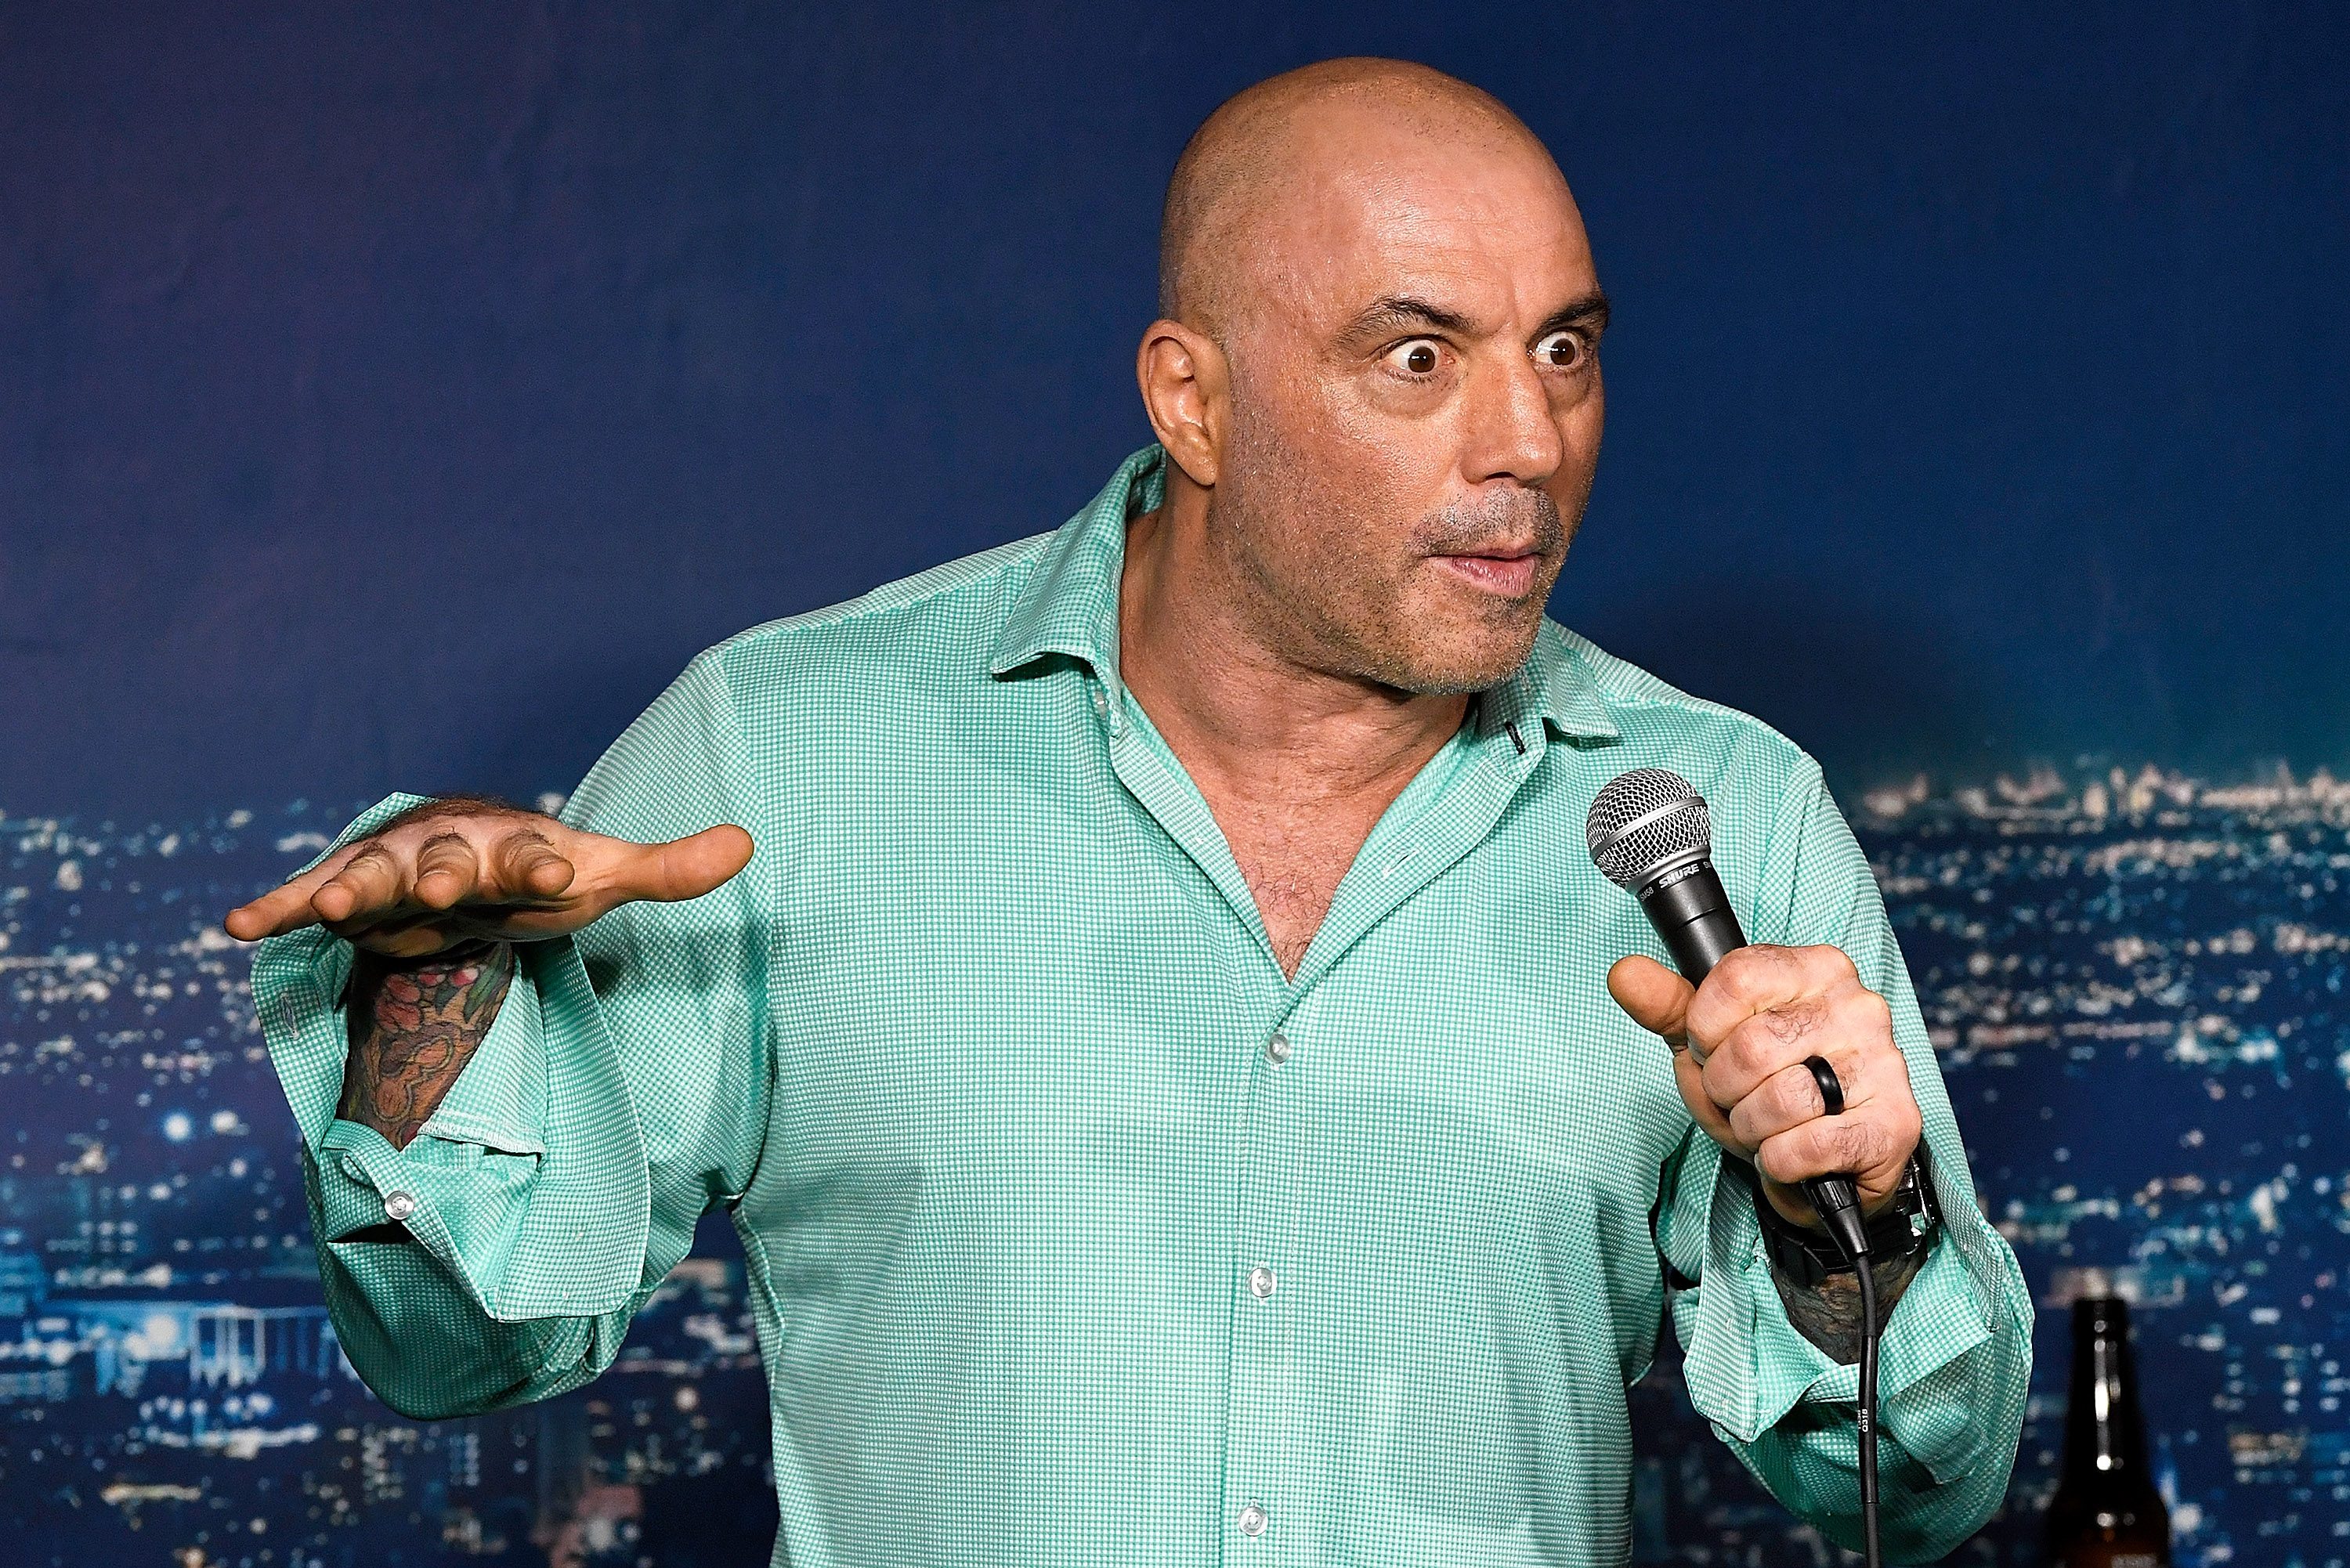 Joe Rogan performs during his appearance at The Ice House Comedy Club on March 15, 2019 in Pasadena, California. After Neil Young and Joni Mitchell left Spotify over Rogan's podcast, other artists are leaving too, some for different reasons.